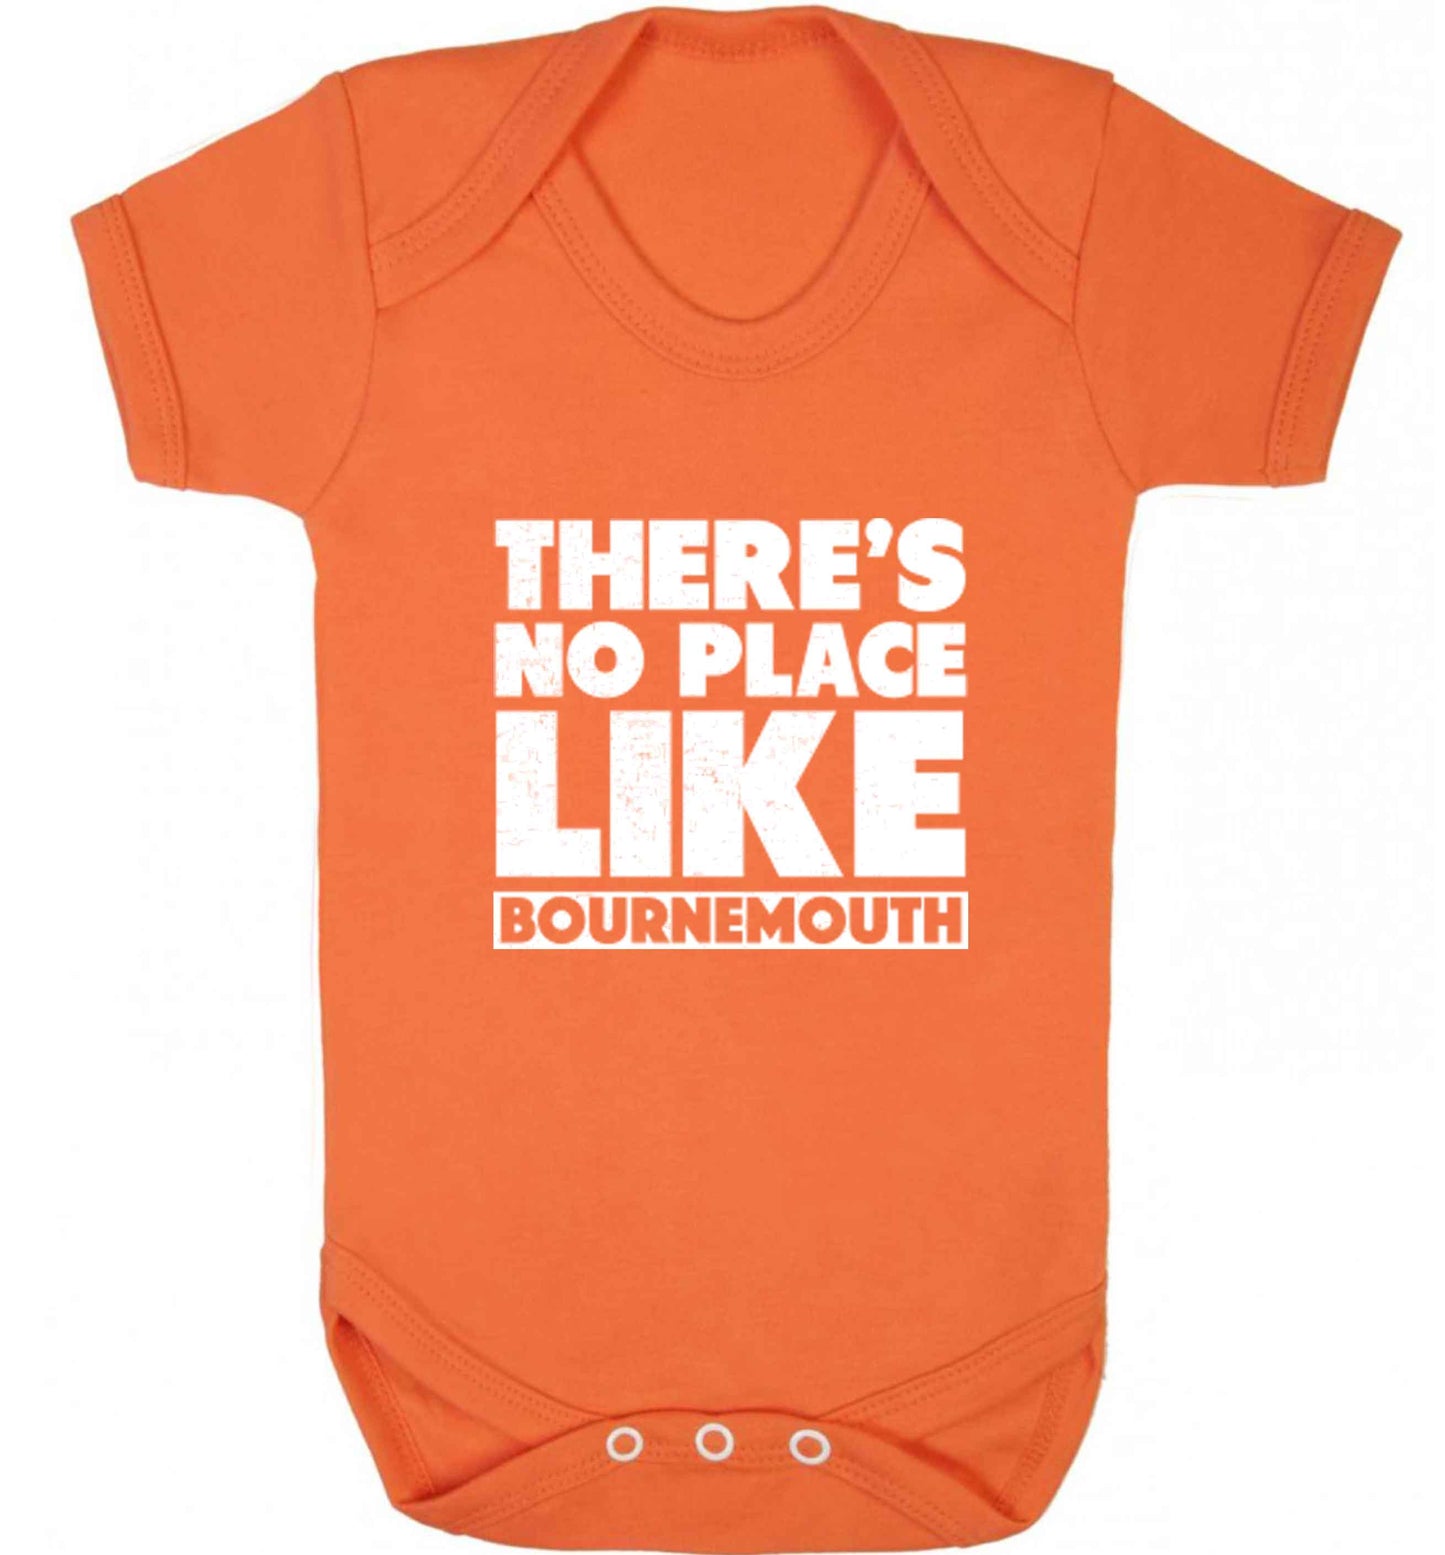 There's no place like Bournemouth baby vest orange 18-24 months